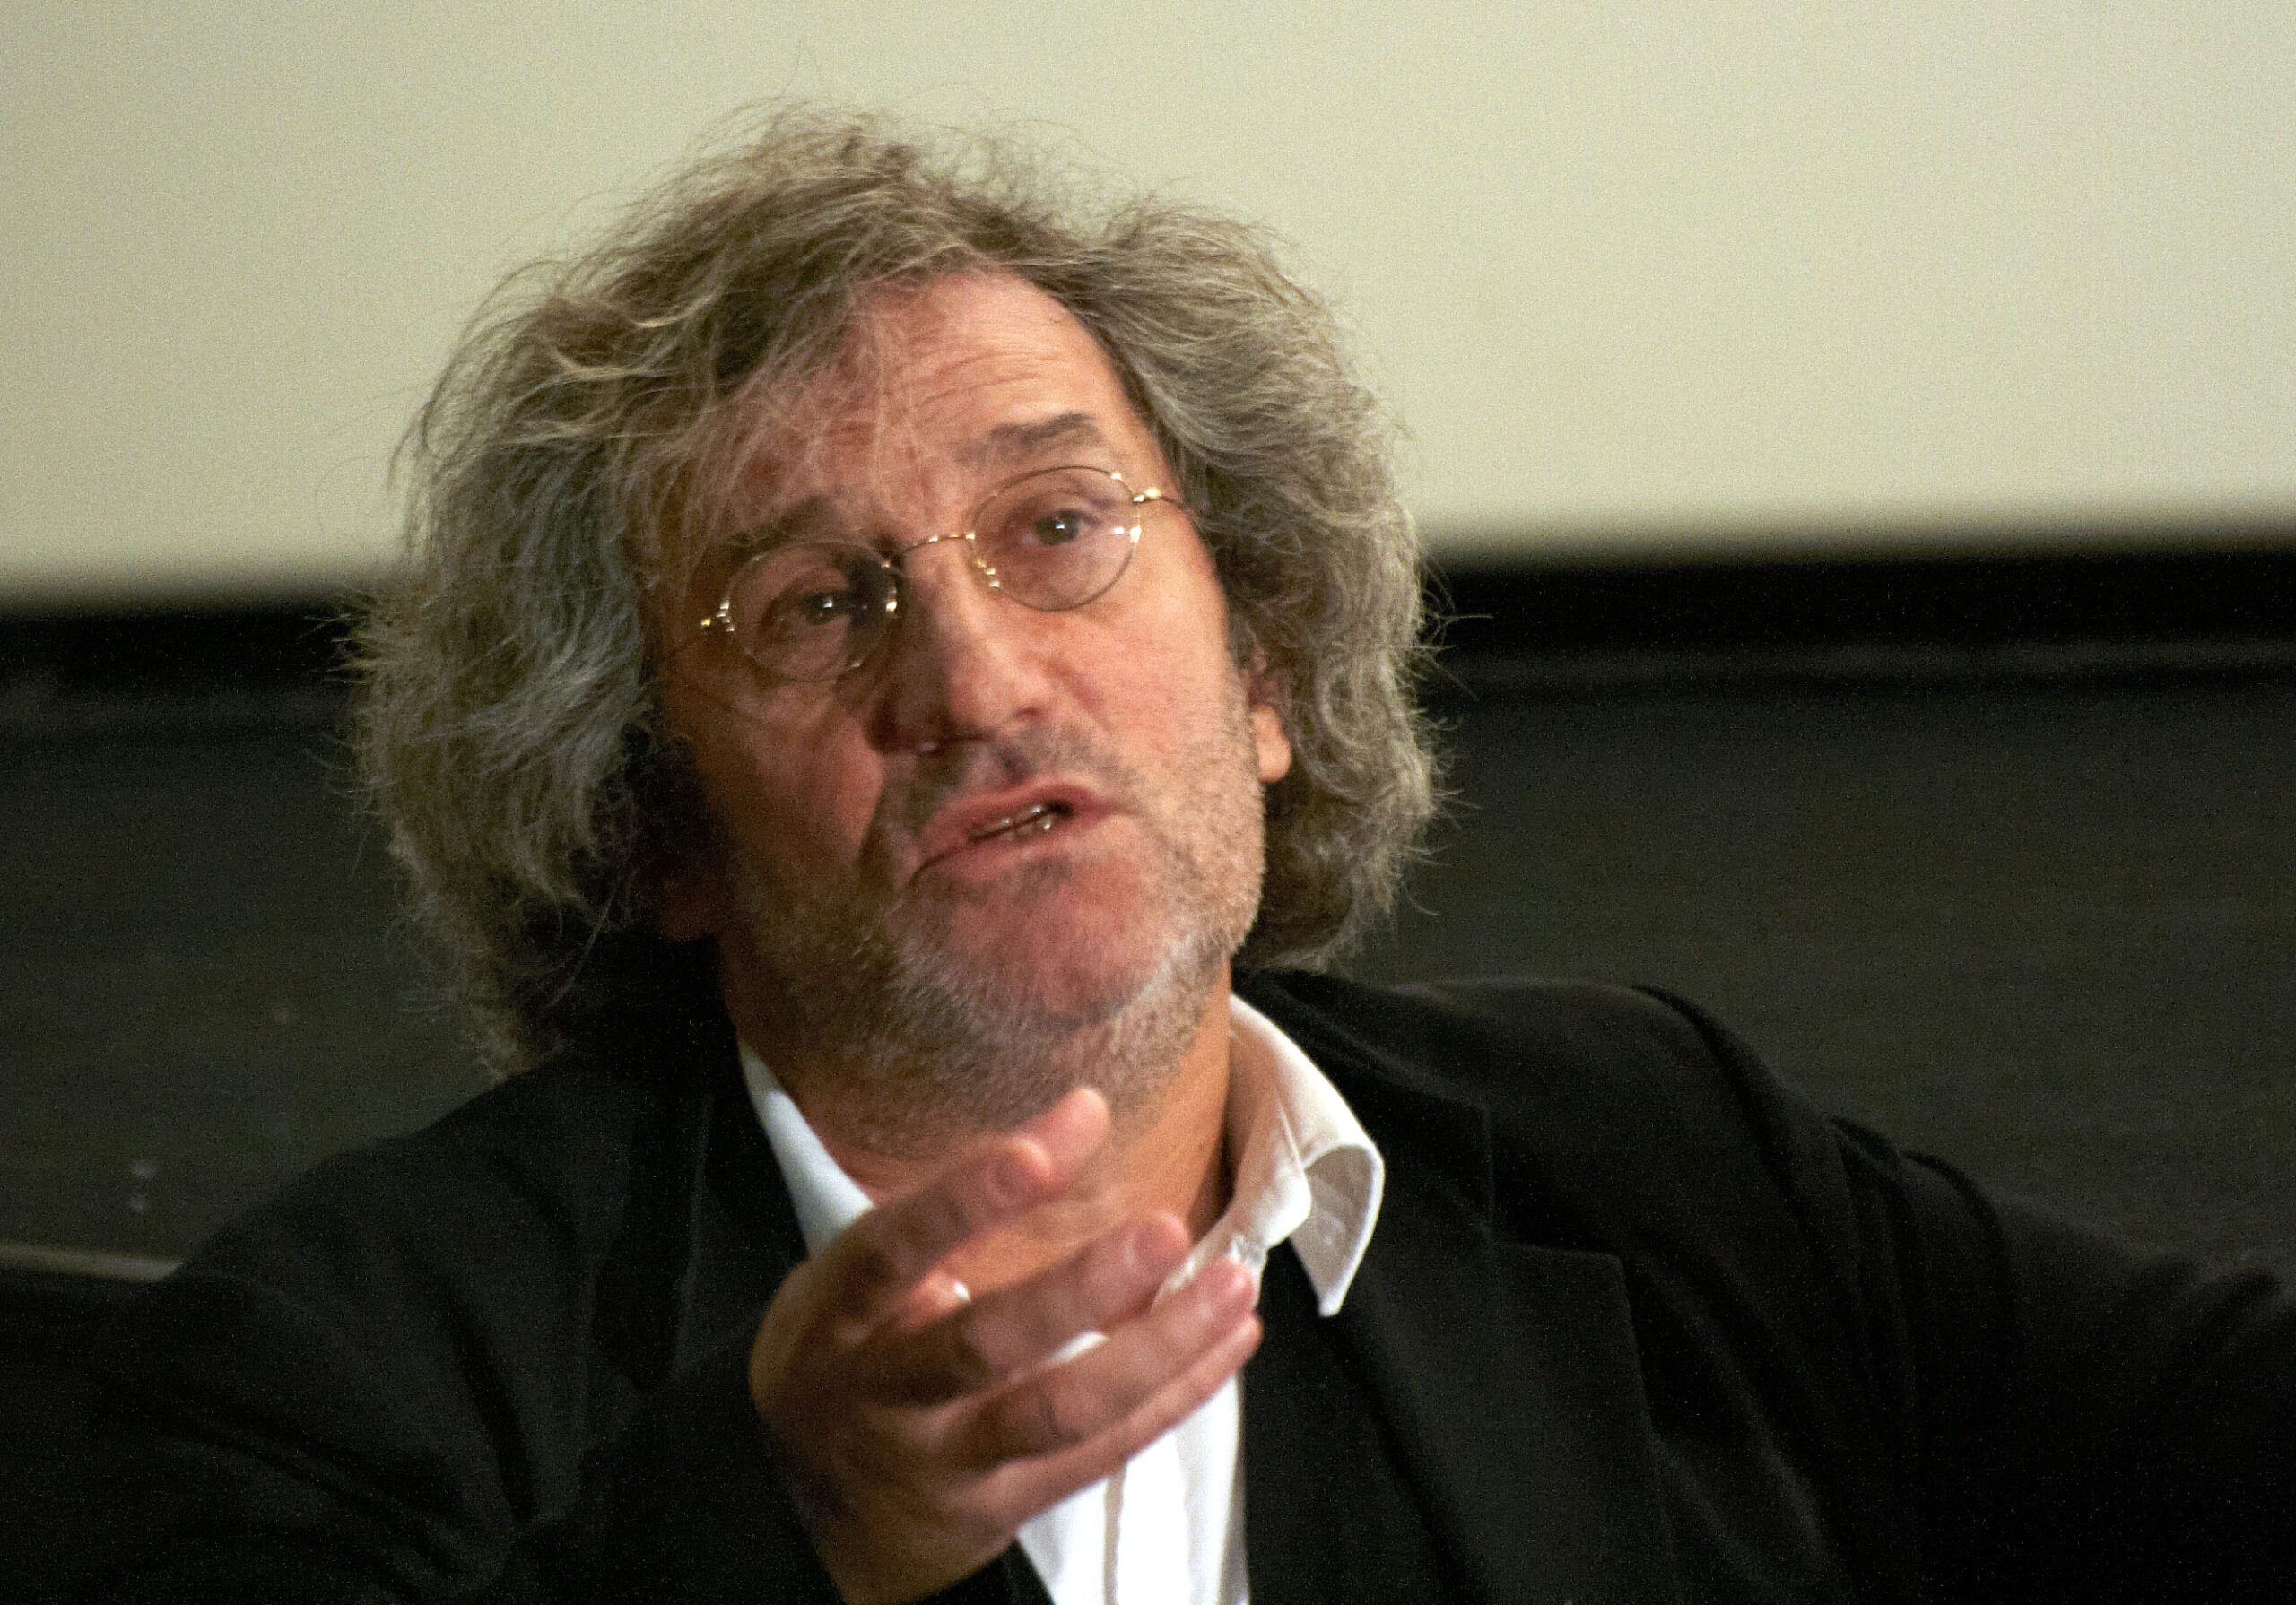 Philippe Garrel (2008), fot. Autorstwa Javier Paredes - img_6482, CC BY-SA 2.0, https://commons.wikimedia.org/w/index.php?curid=15993844